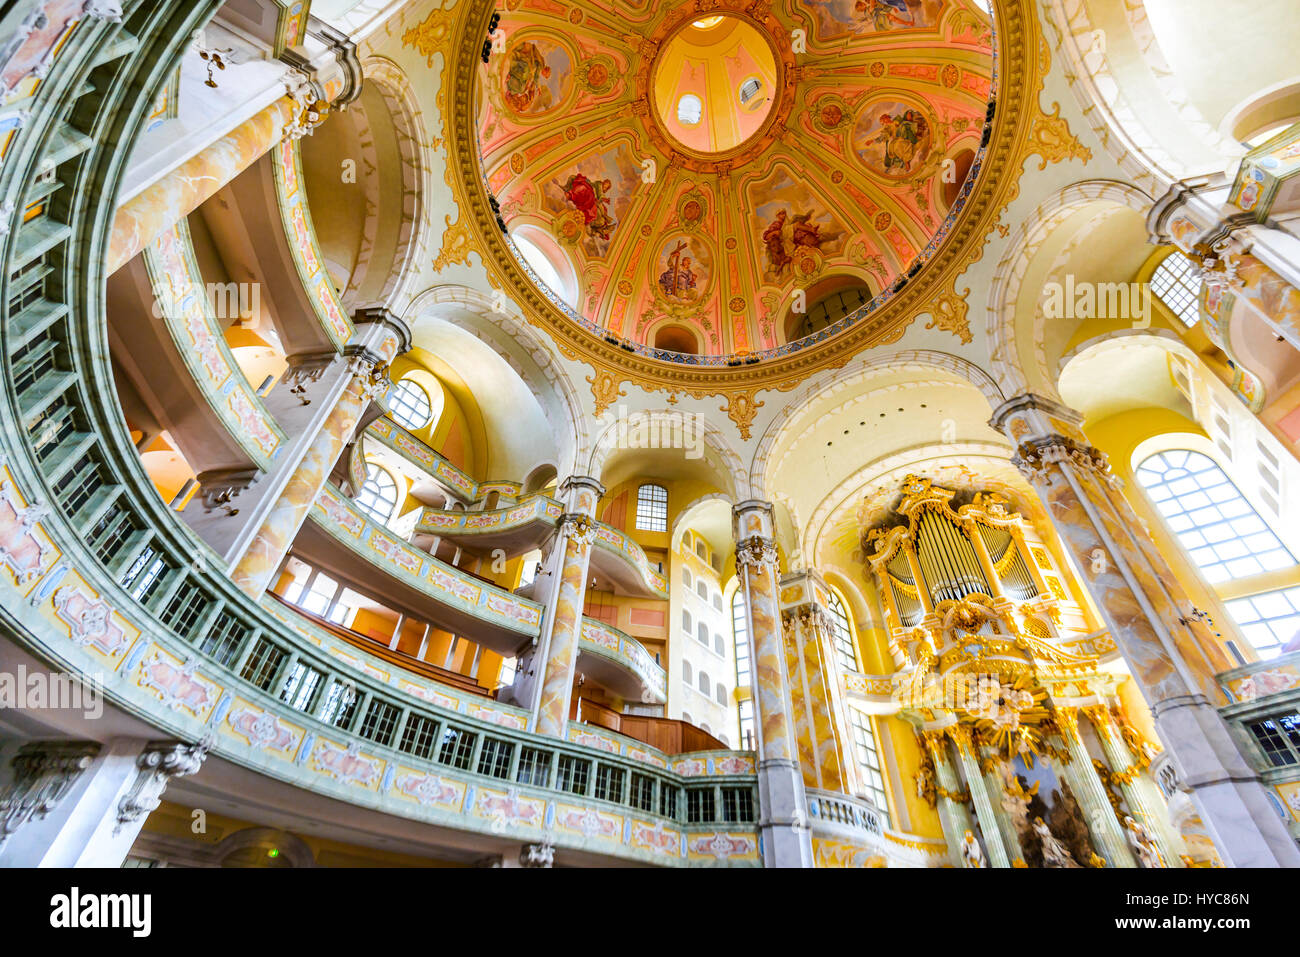 DRESDEN, GERMANY - 9 AUGUST 2015: Dresden, Germany. The interior of the Frauenkirche cathedral. Frauenkirche was completed in 1743 and is one of the m Stock Photo